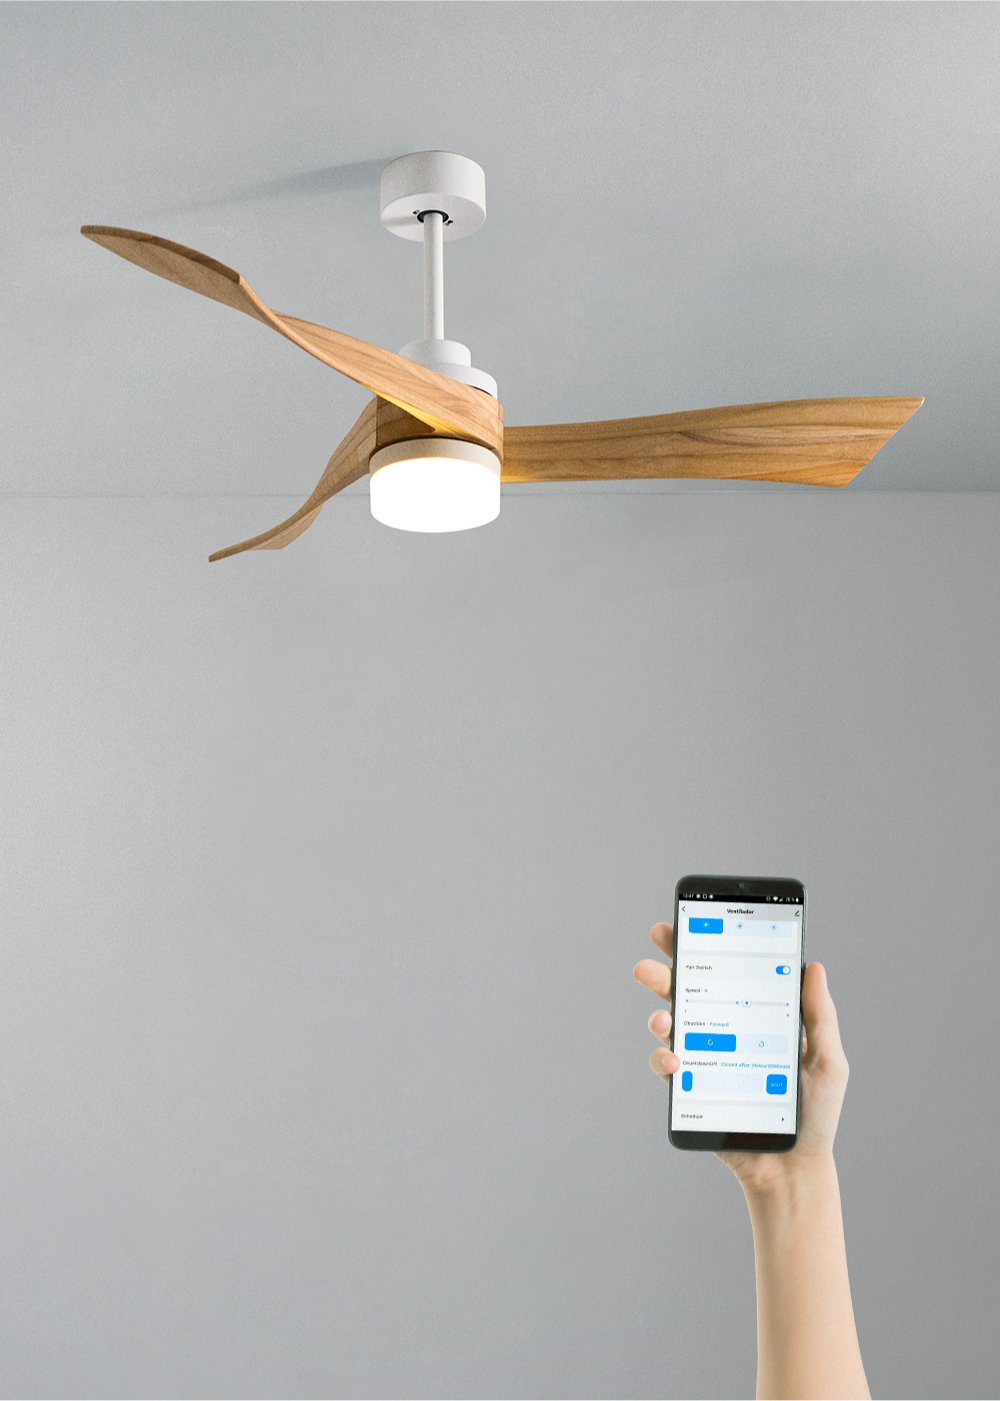 Modern ceiling fans with light - Create